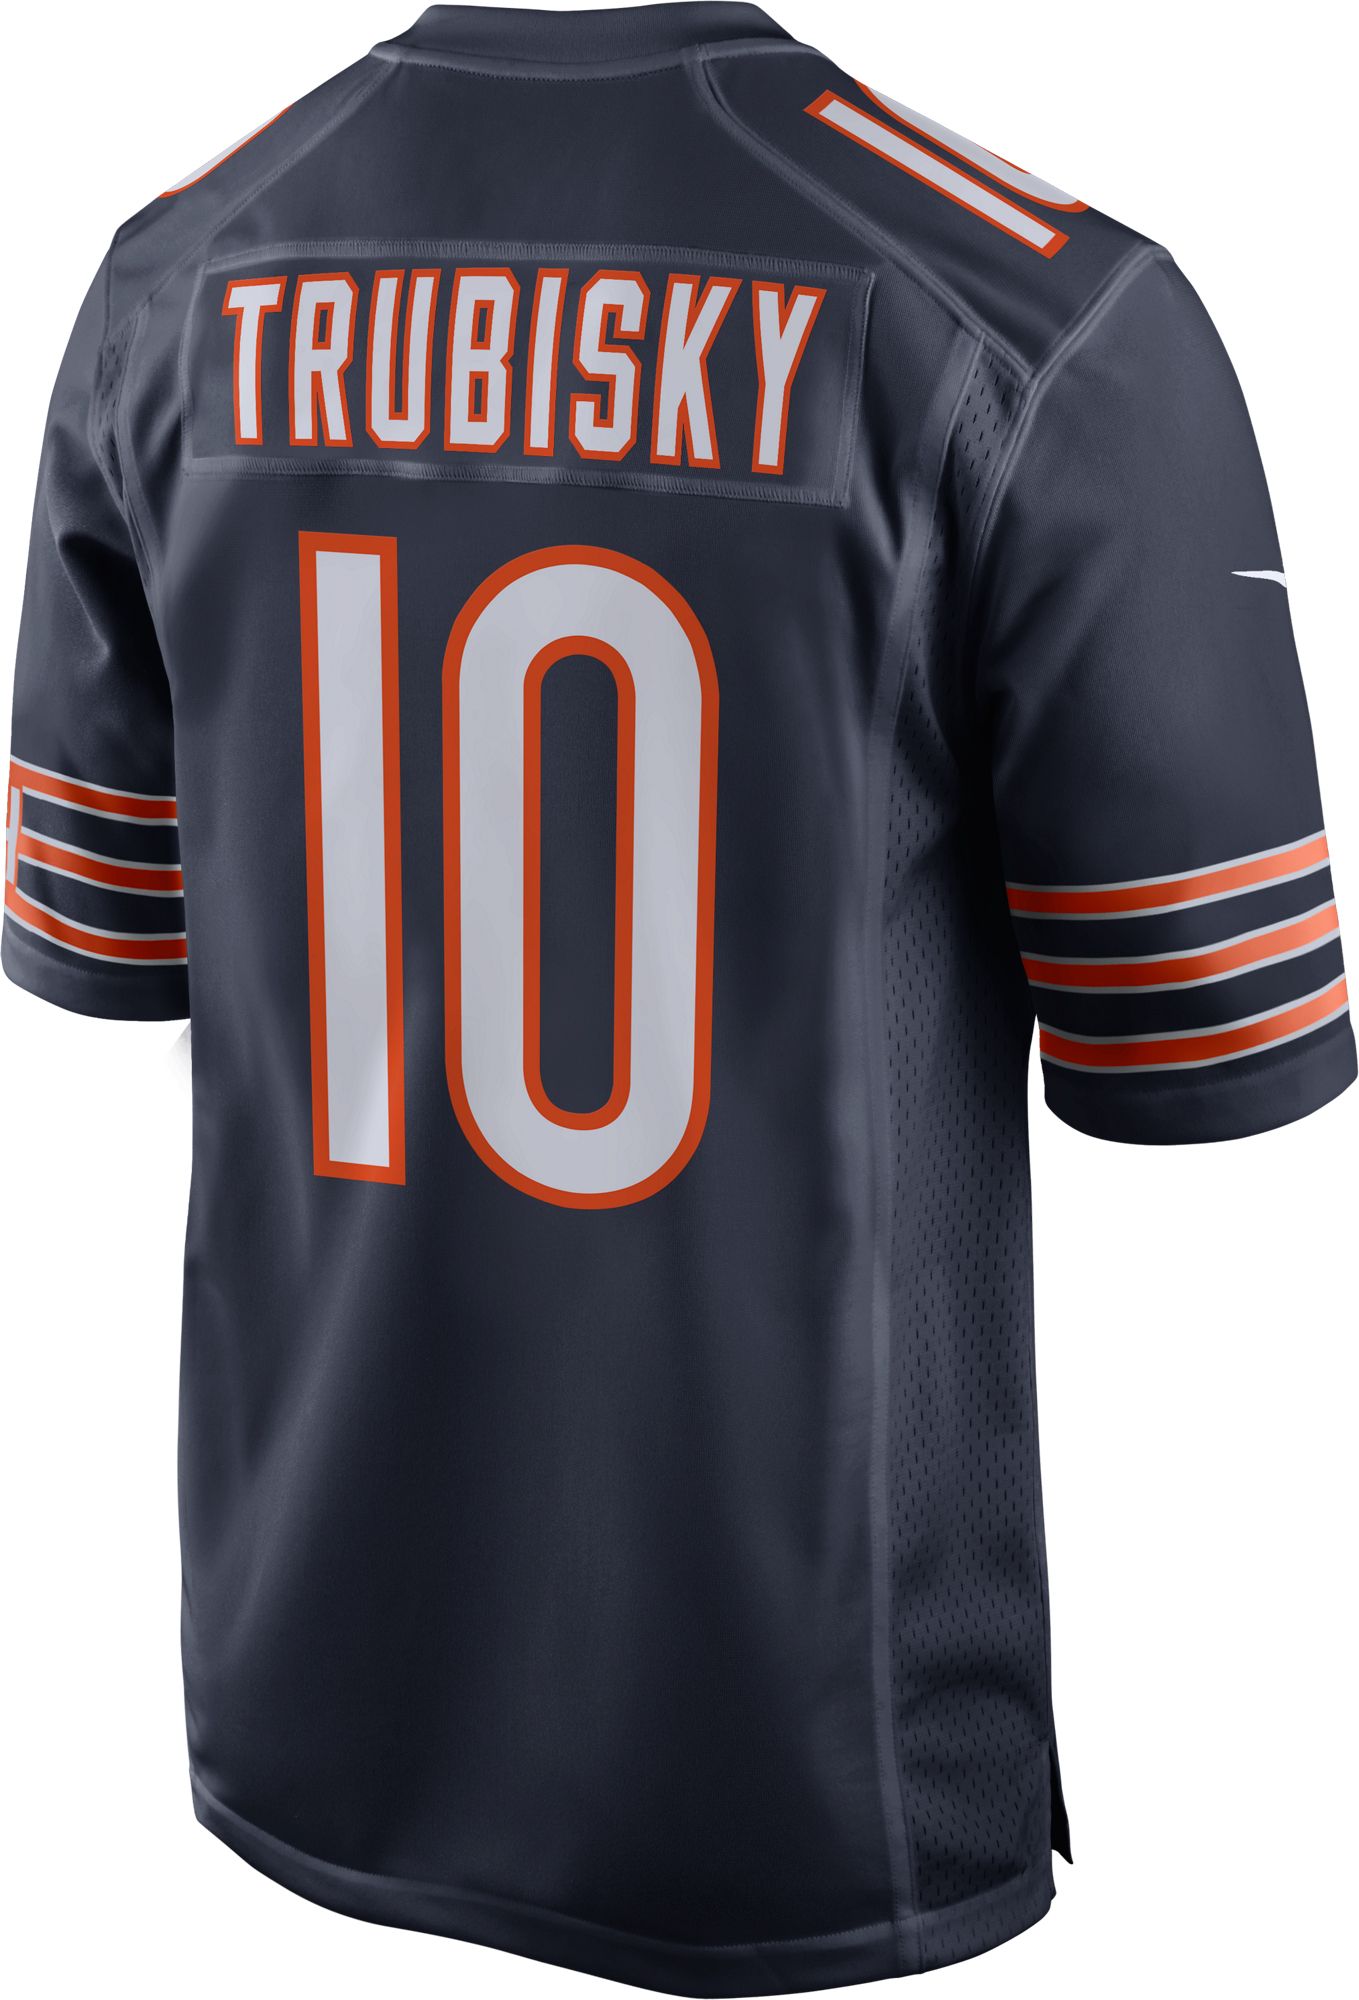 chicago bears number 10 jersey